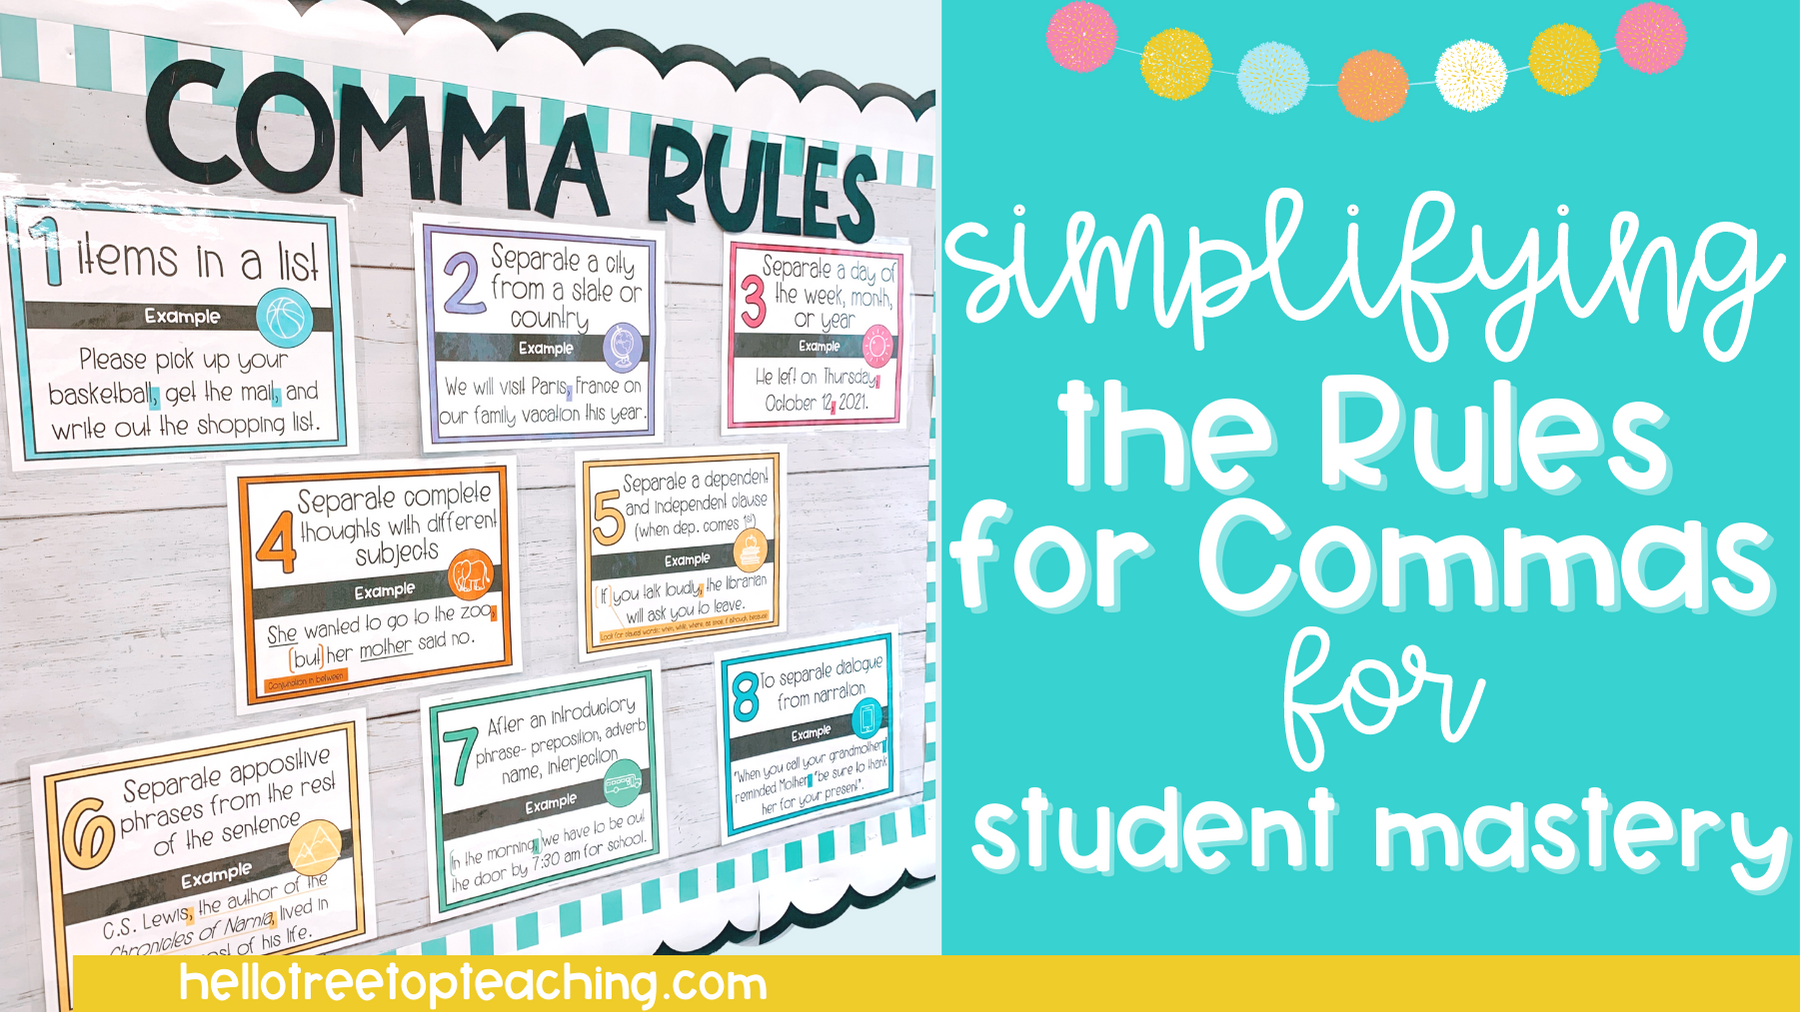 Rules for Commas bulletin board with text that says "simplifying the rules of commas for student mastery"